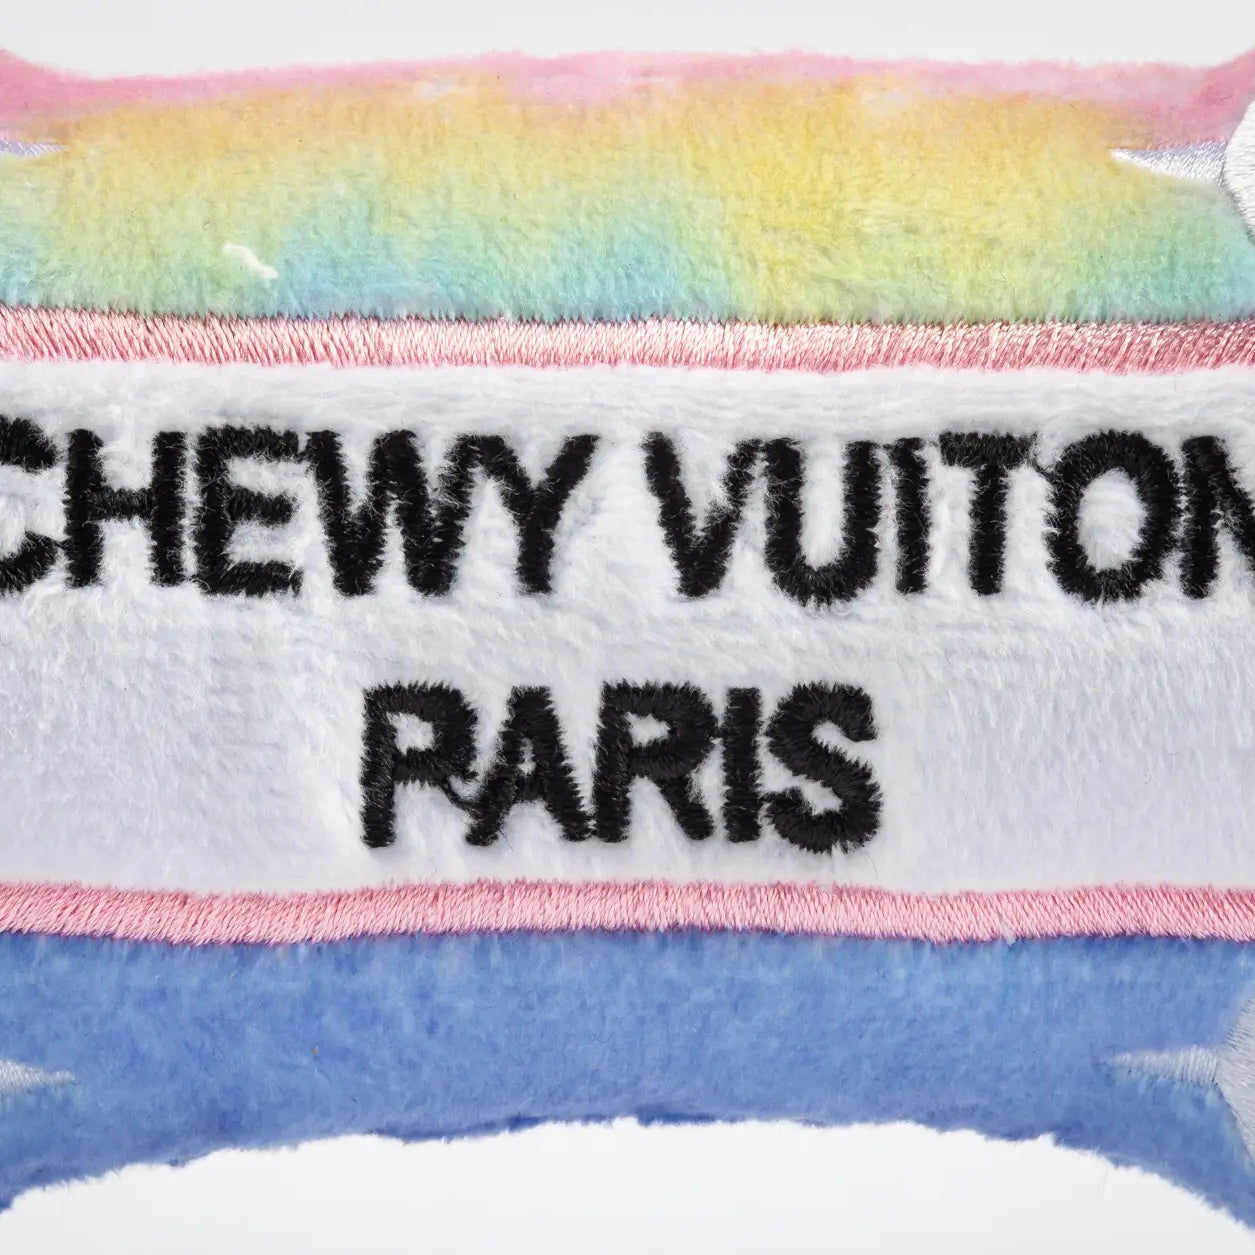 Chewy Vuiton Bone - Pink Ombre